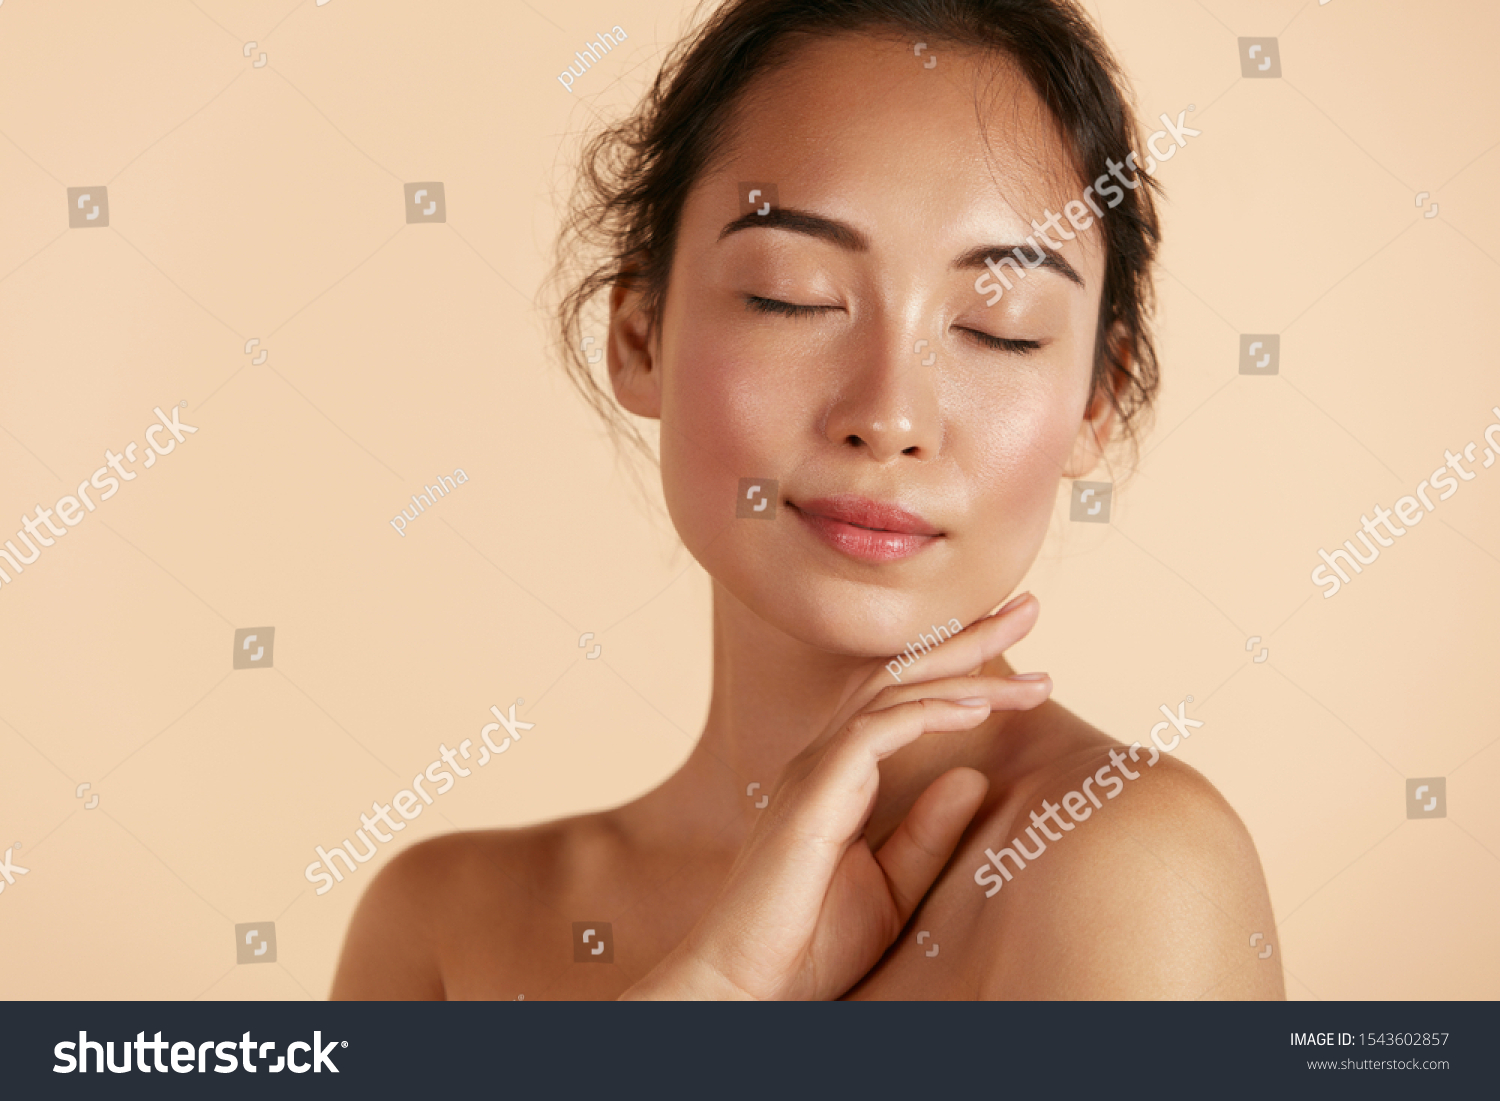 Beauty face. Woman with natural makeup and healthy skin portrait. Beautiful asian girl model touching fresh glowing hydrated facial skin on beige background closeup. Skin care concept #1543602857